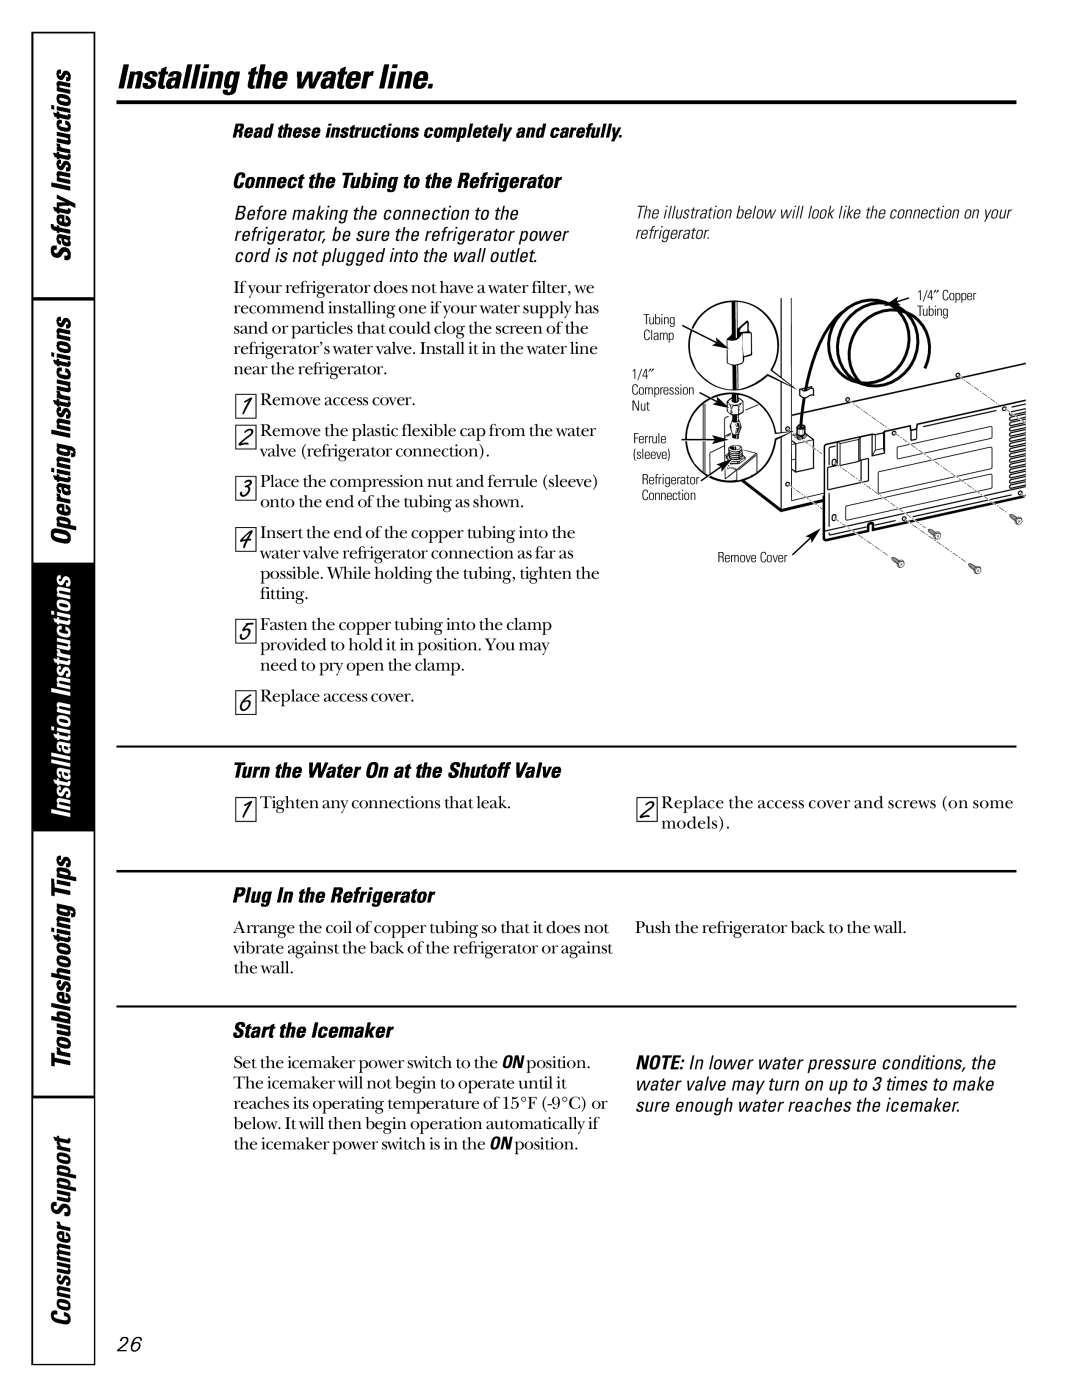 GE 200D2600P001, 21 Installation Instructions Operating Instructions Safety Instructions, Plug In the Refrigerator 